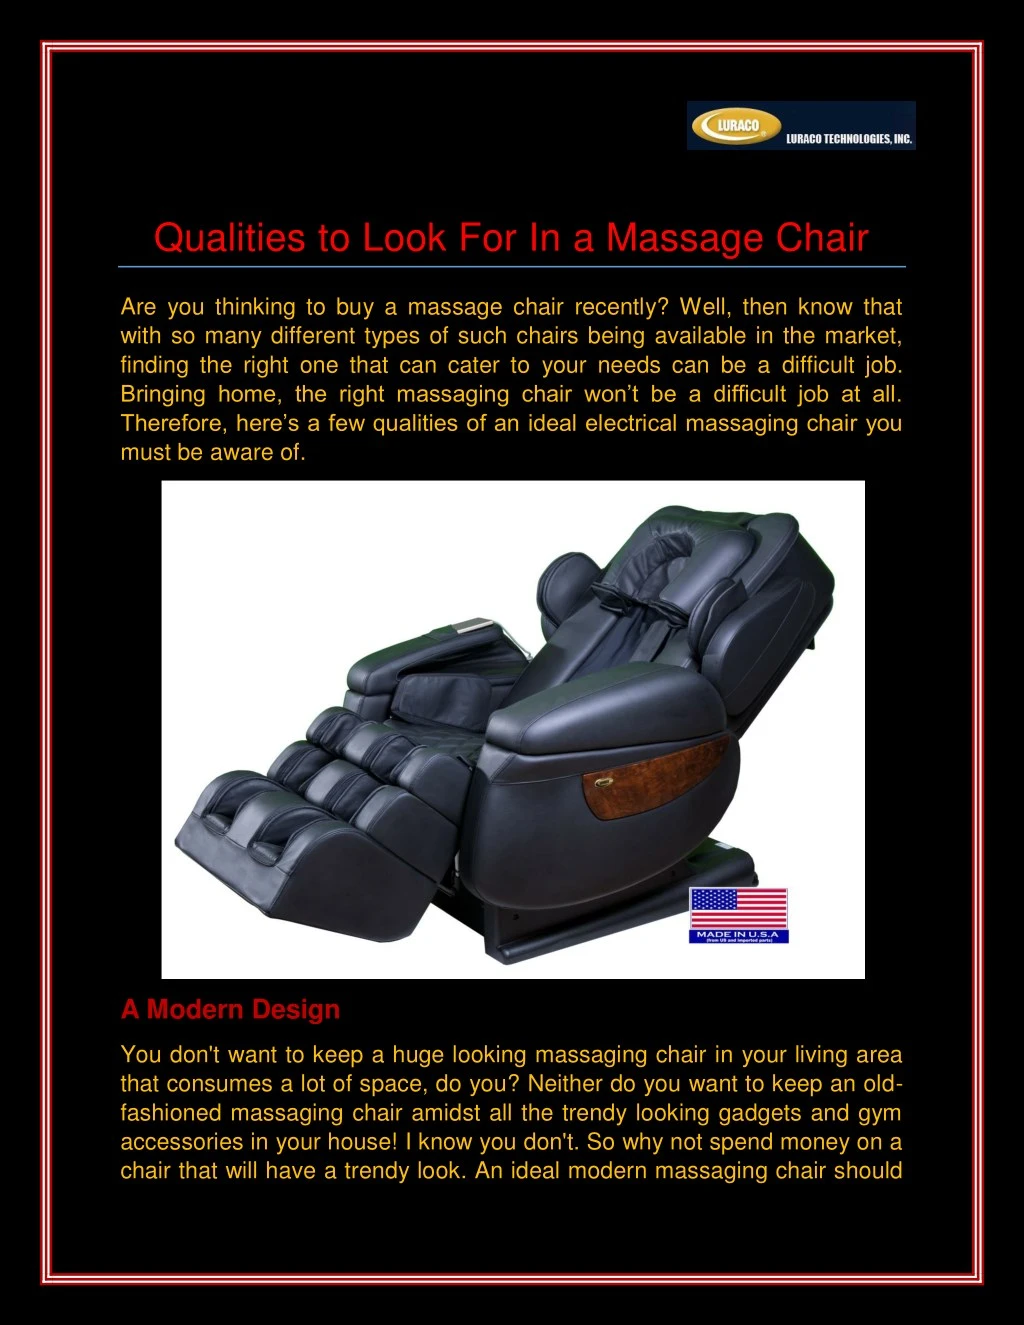 qualities to look for in a massage chair